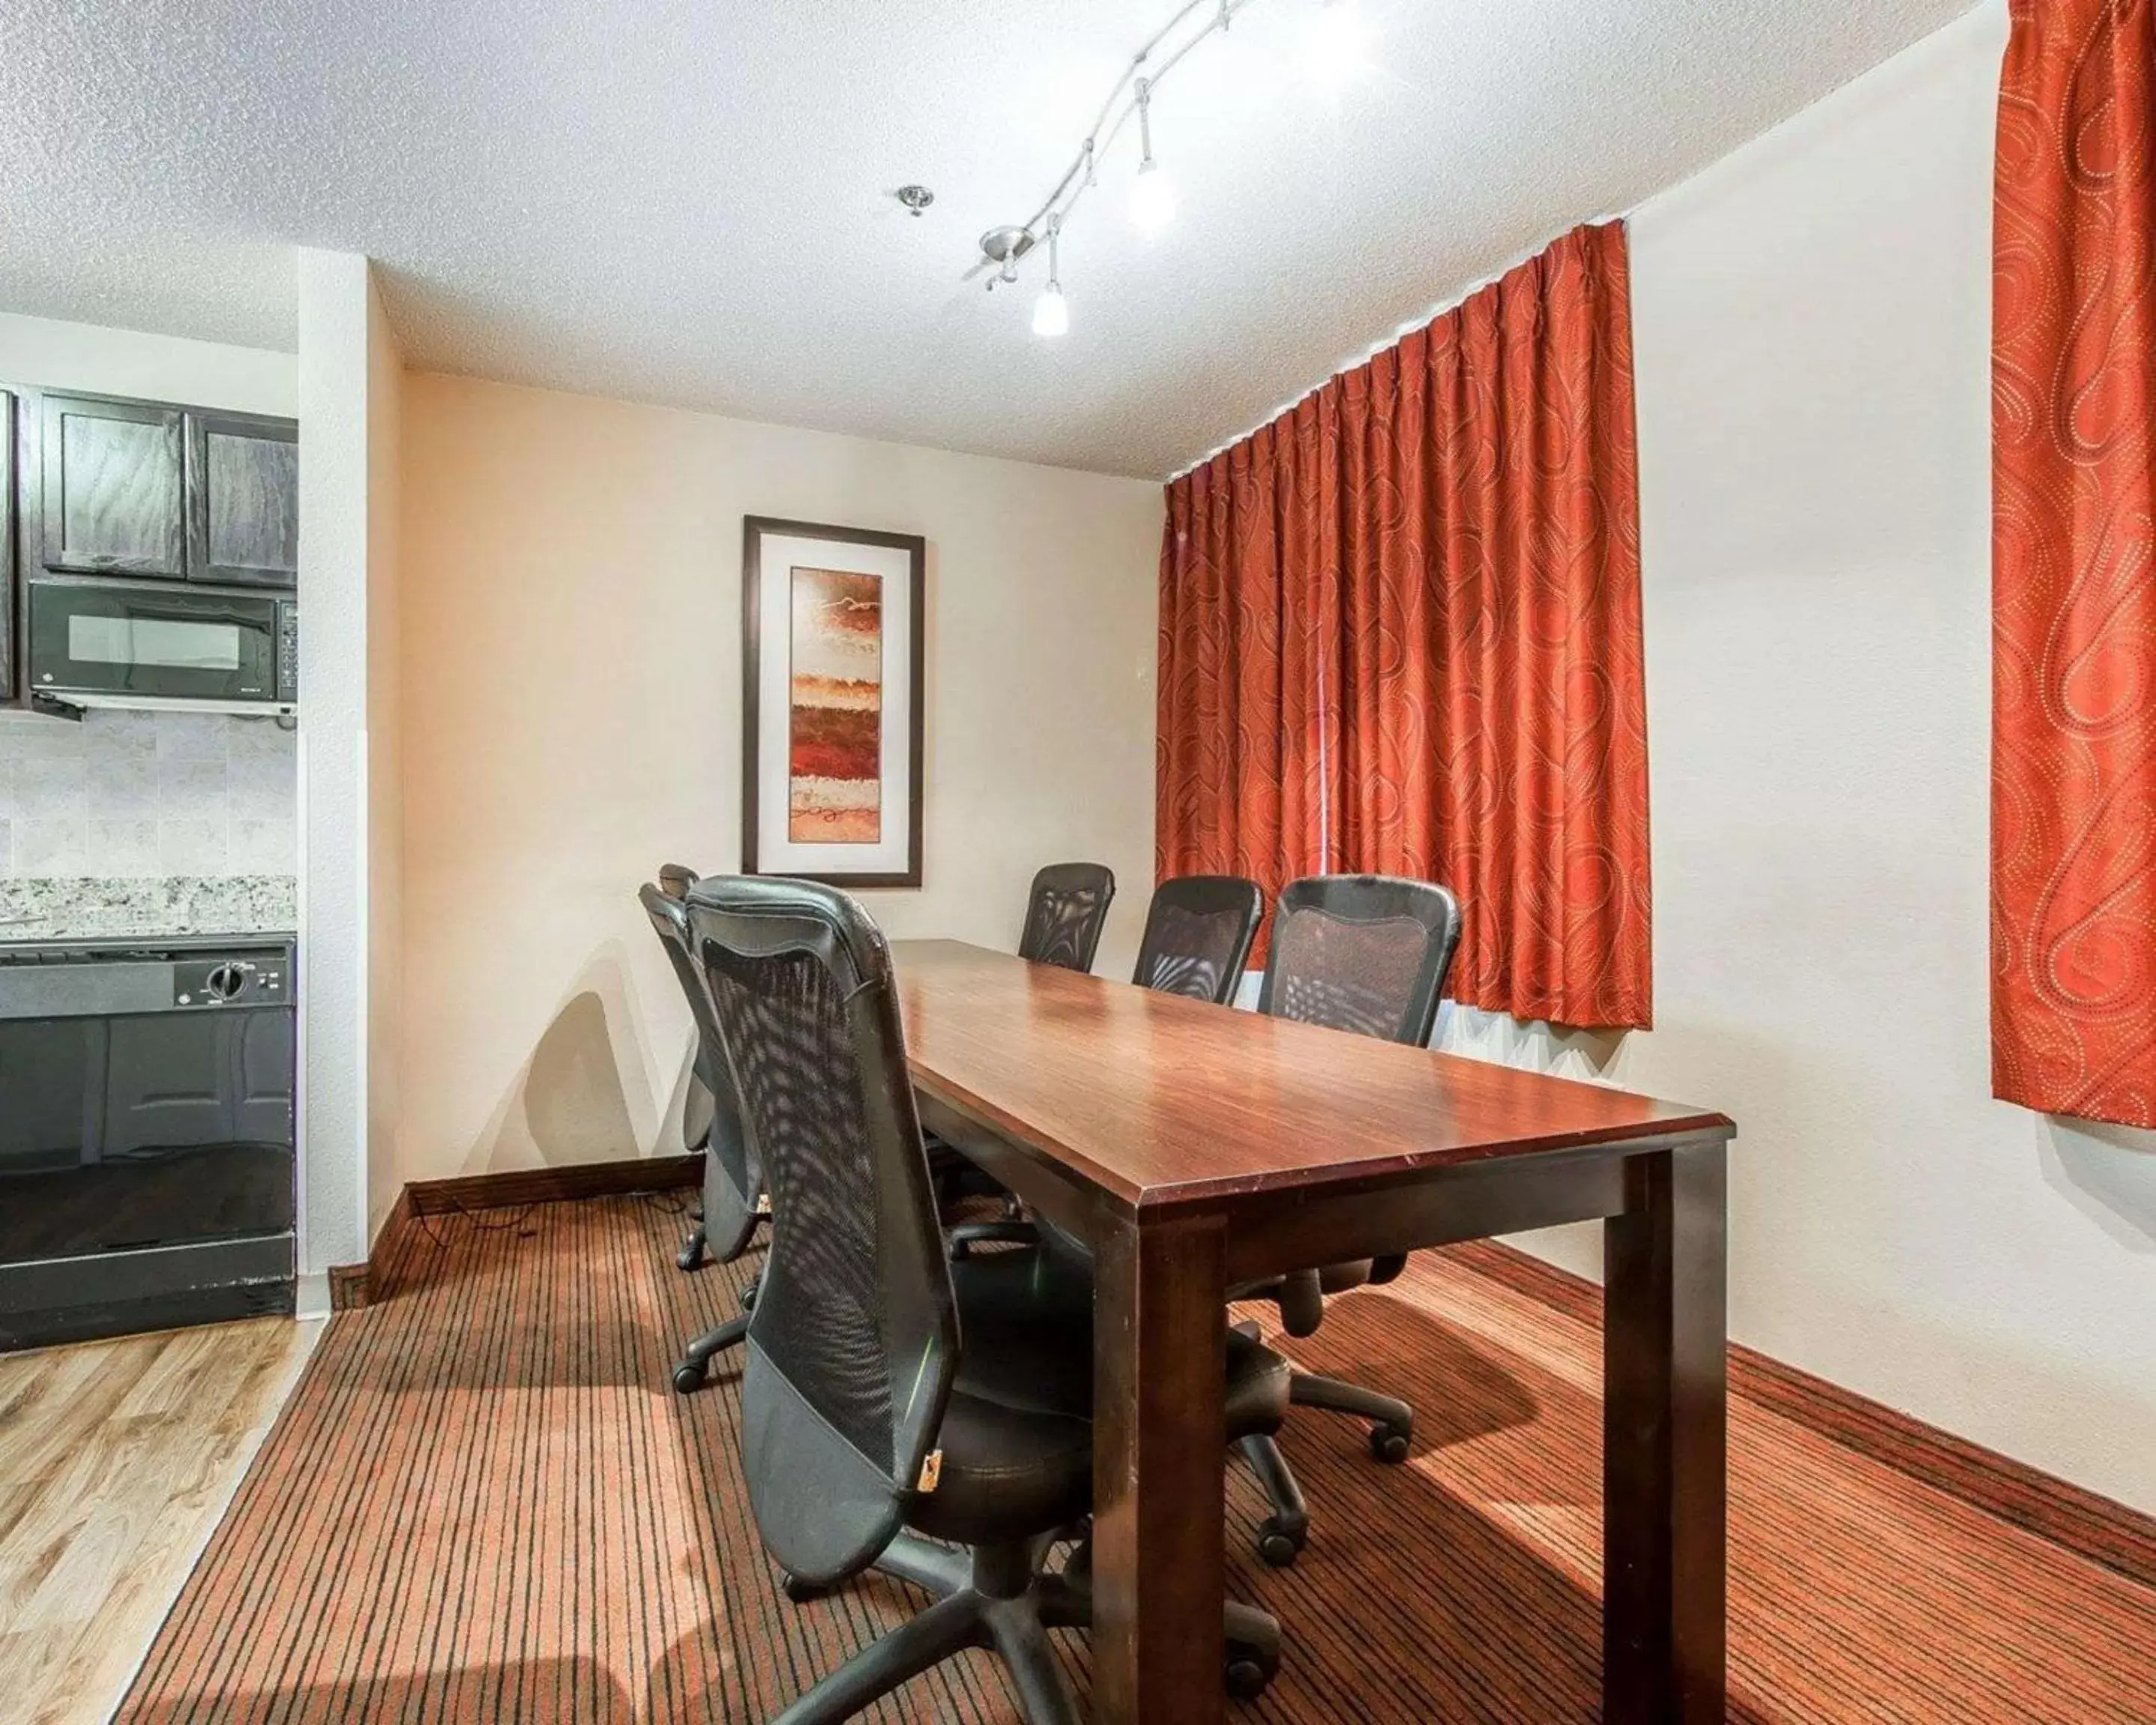 Bedroom, Dining Area in MainStay Suites Knoxville Airport